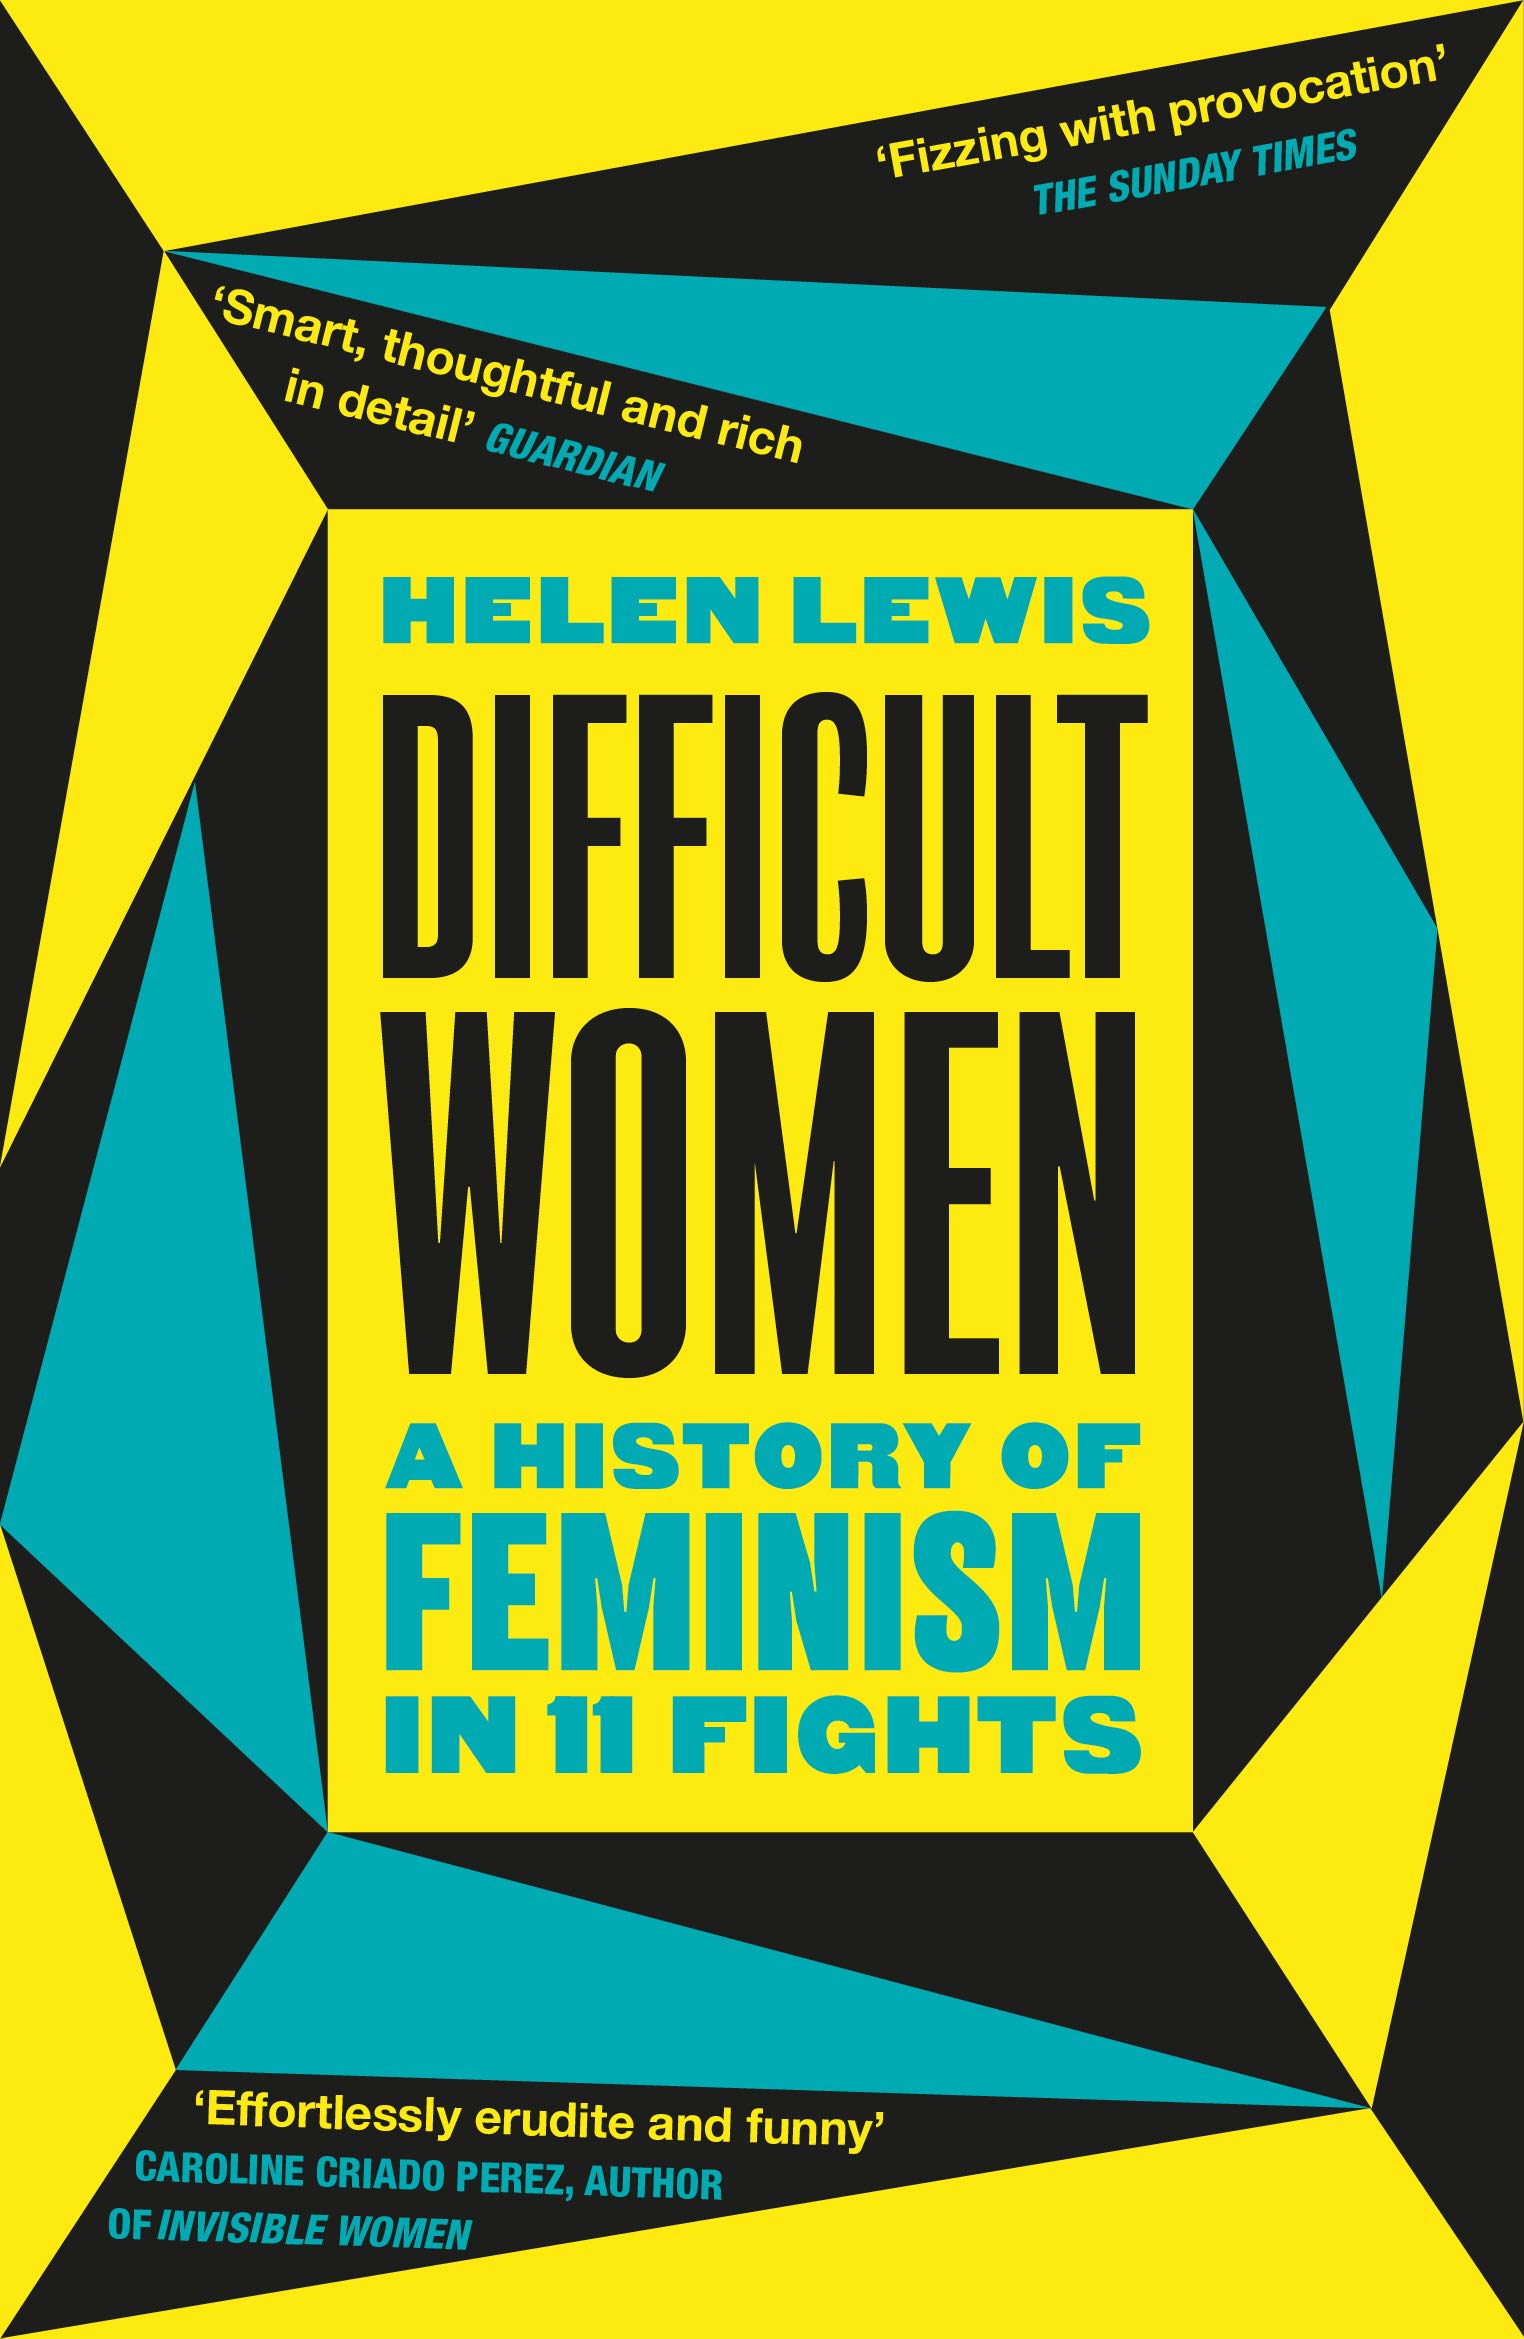 Difficult Women: A History of Feminism in 11 Fights by Helen Lewis